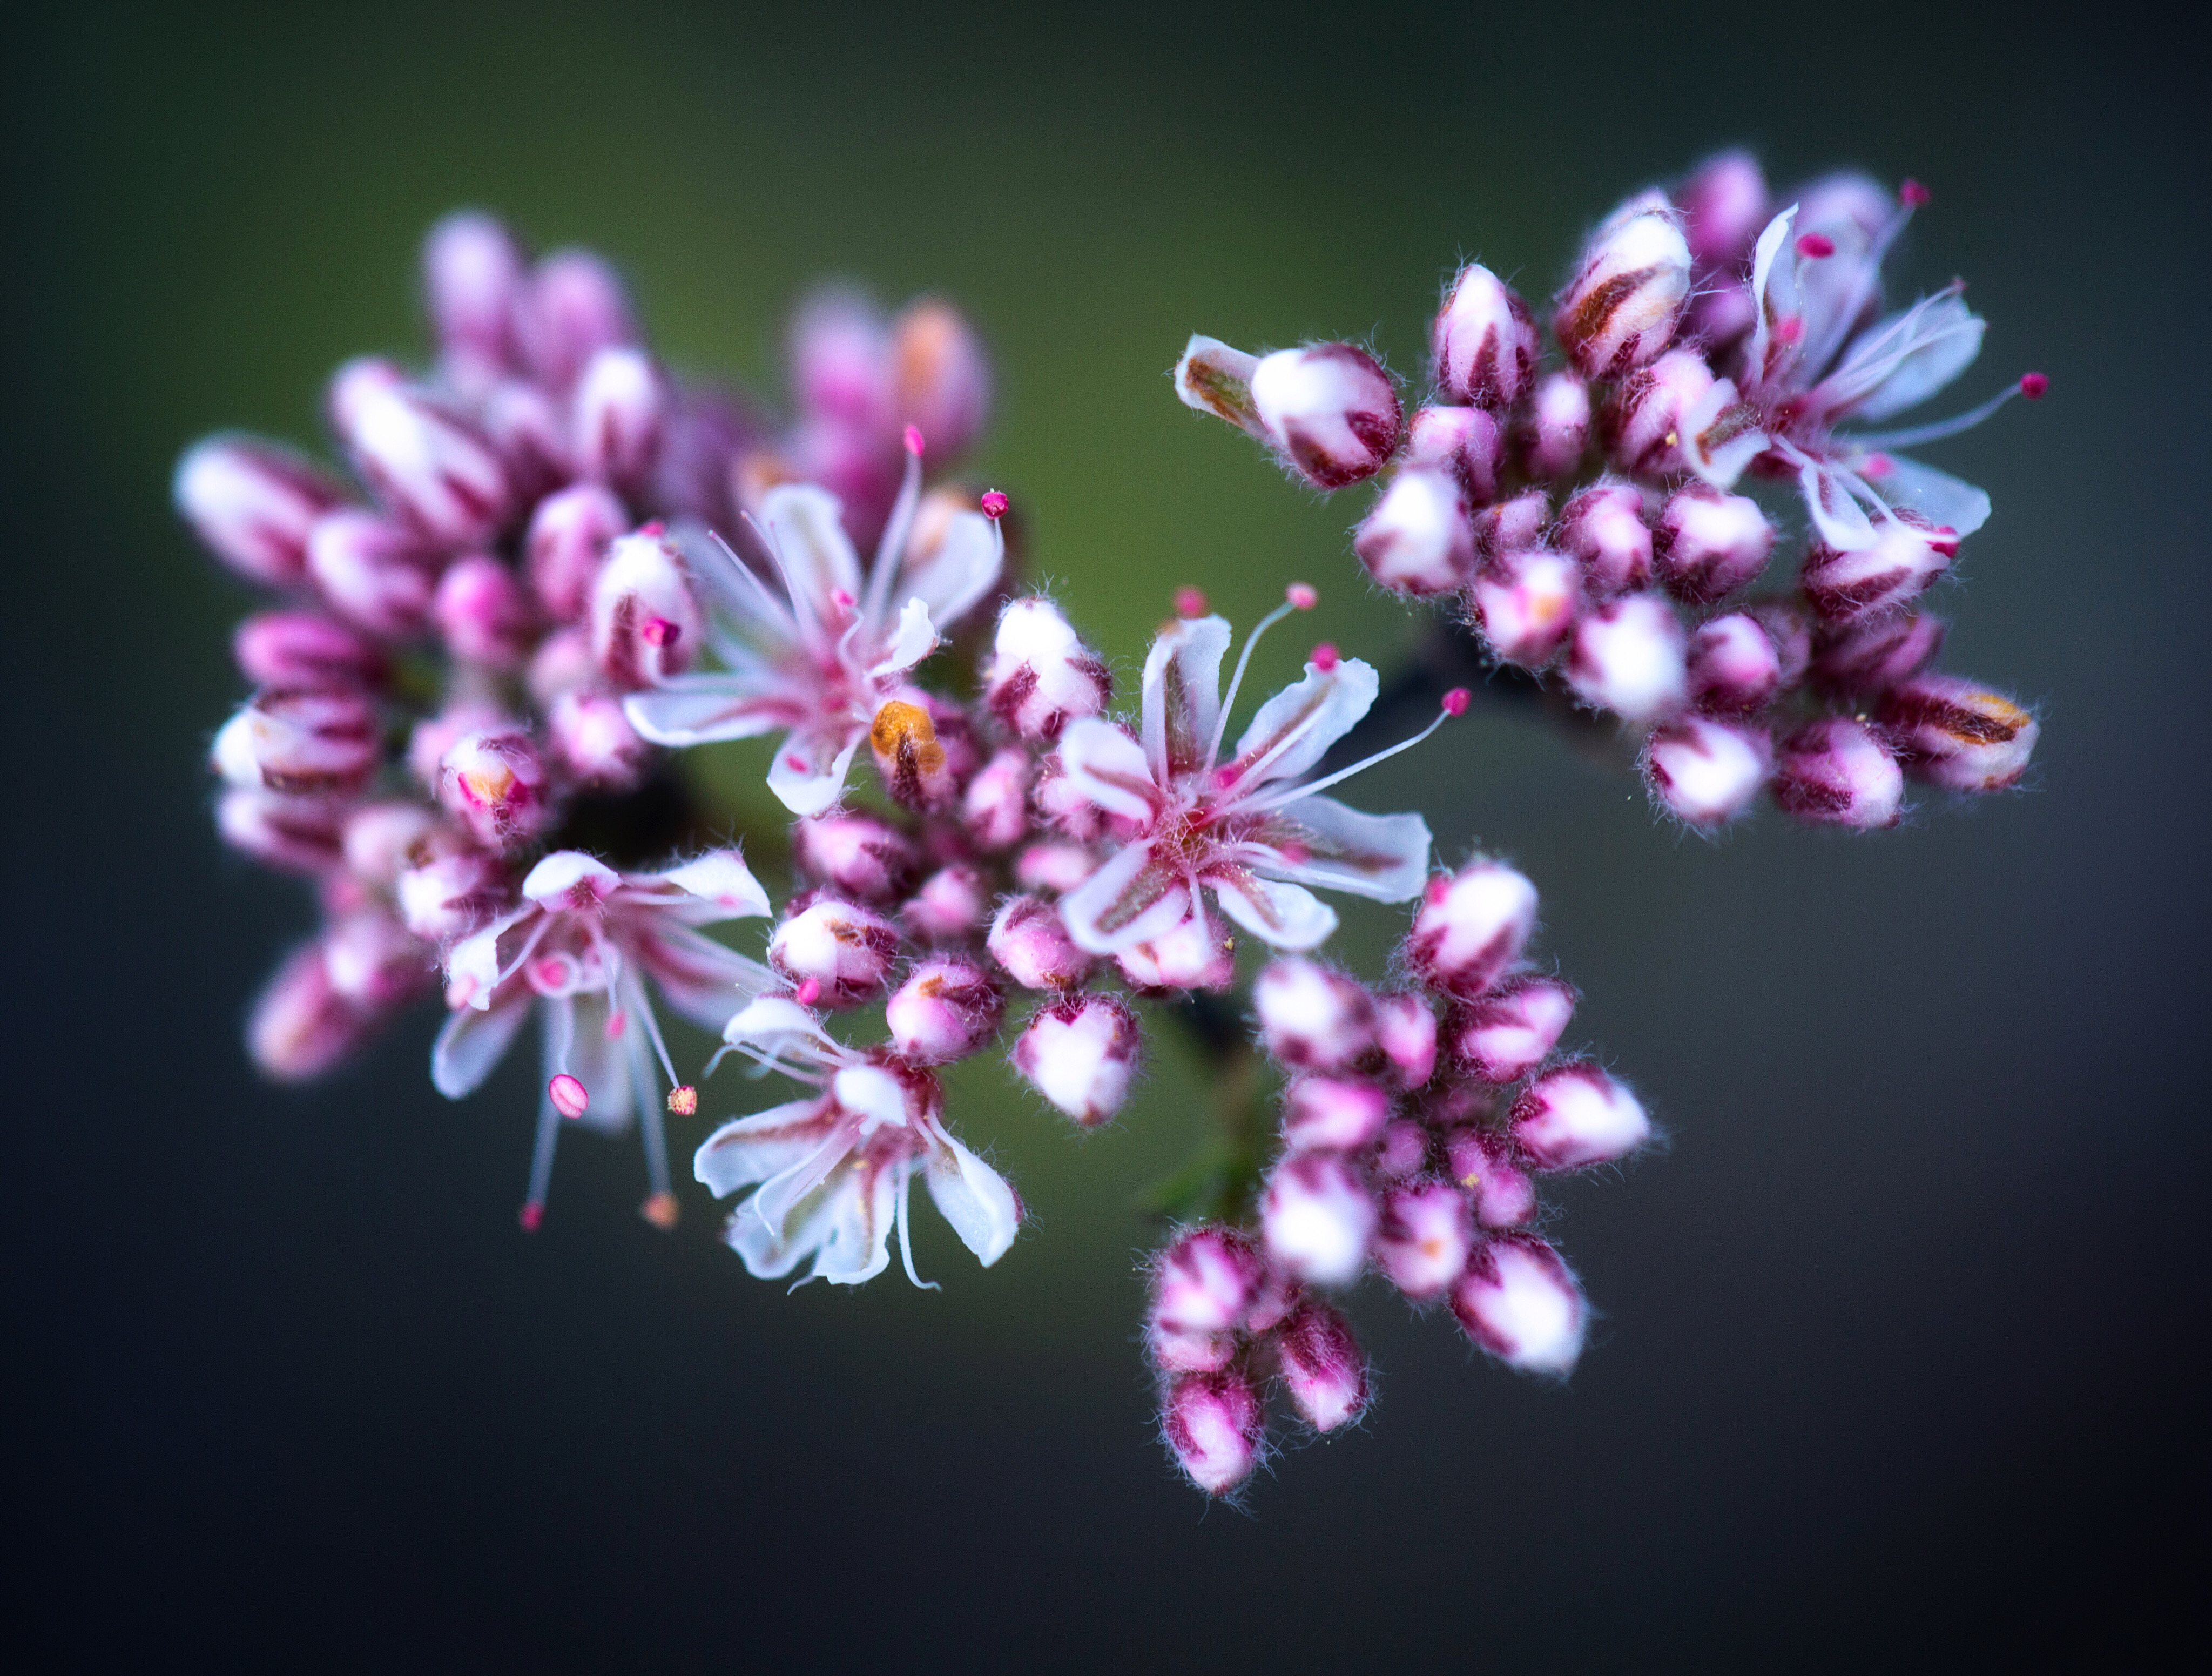 Photo by Lisa Marcelle Nowitz  |  Desert buckwheat blossoms in spring